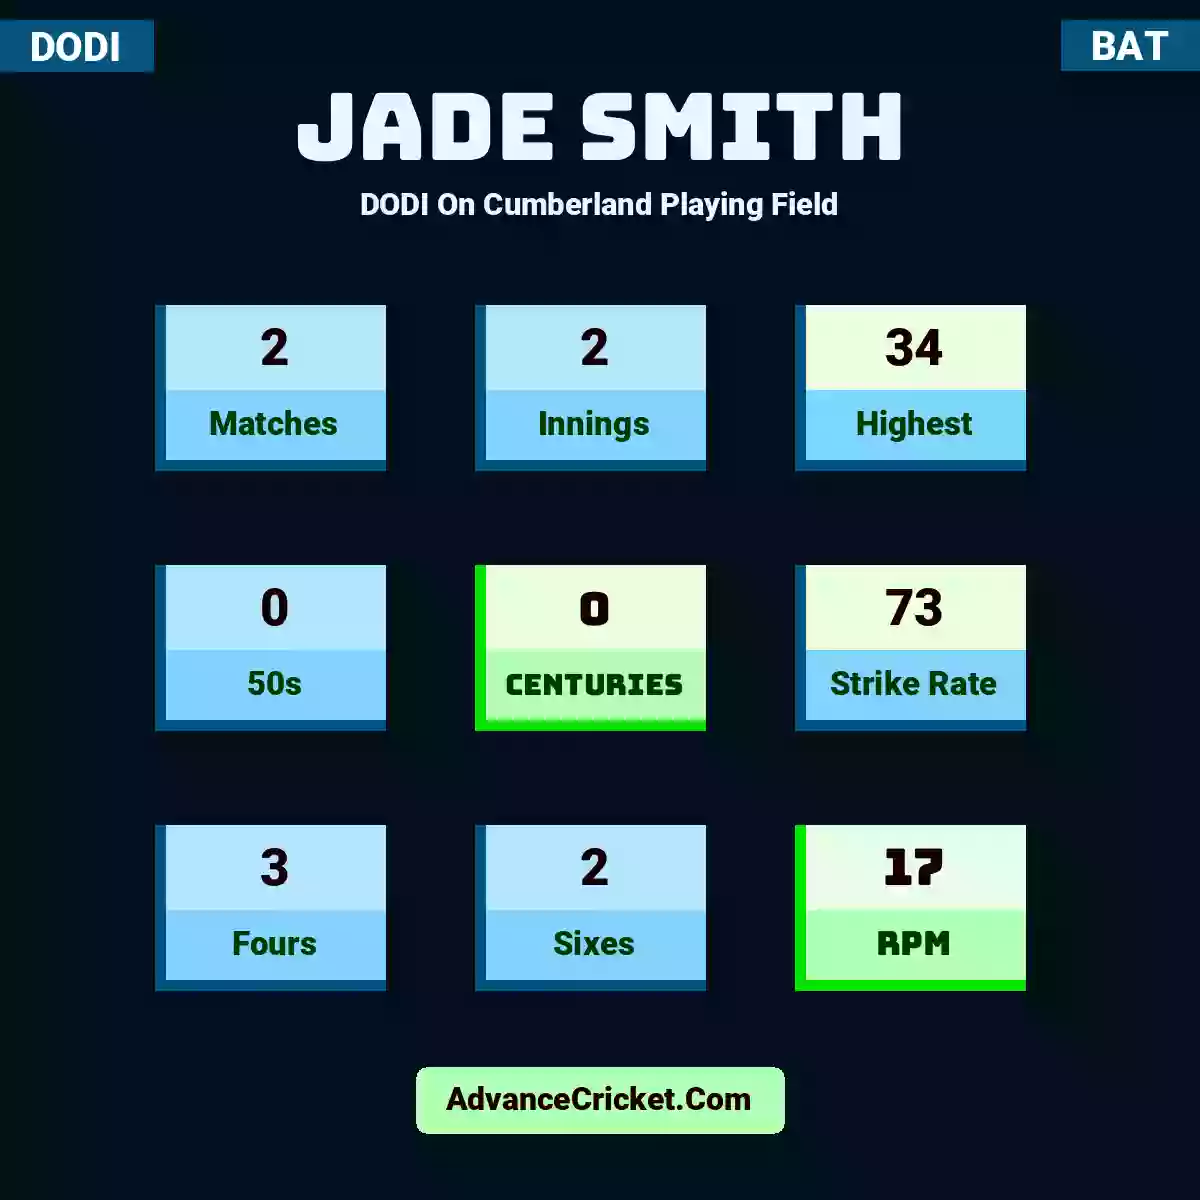 Jade Smith DODI  On Cumberland Playing Field, Jade Smith played 2 matches, scored 34 runs as highest, 0 half-centuries, and 0 centuries, with a strike rate of 73. J.Smith hit 3 fours and 2 sixes, with an RPM of 17.